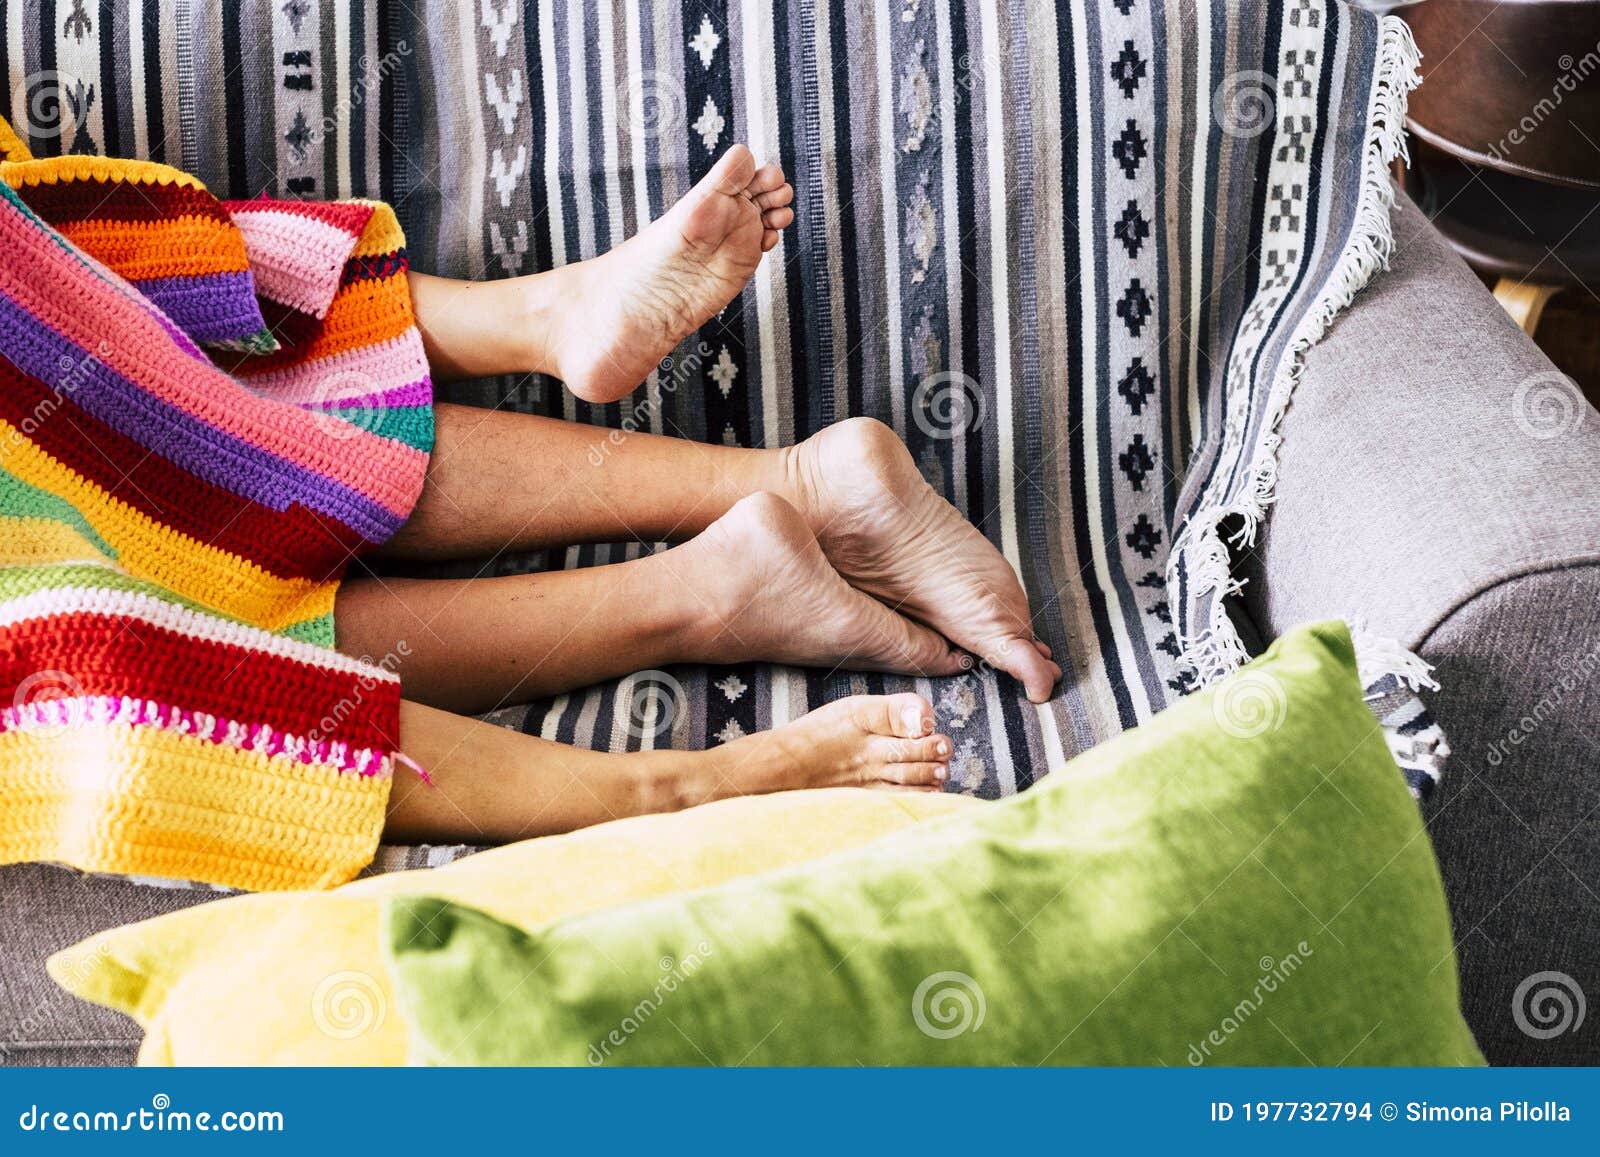 Couple Having Sex Activity Concept with Nude Feet and Coloured Cover on the Sofa at Home - People Lover and Sexual Active Stock Photo image